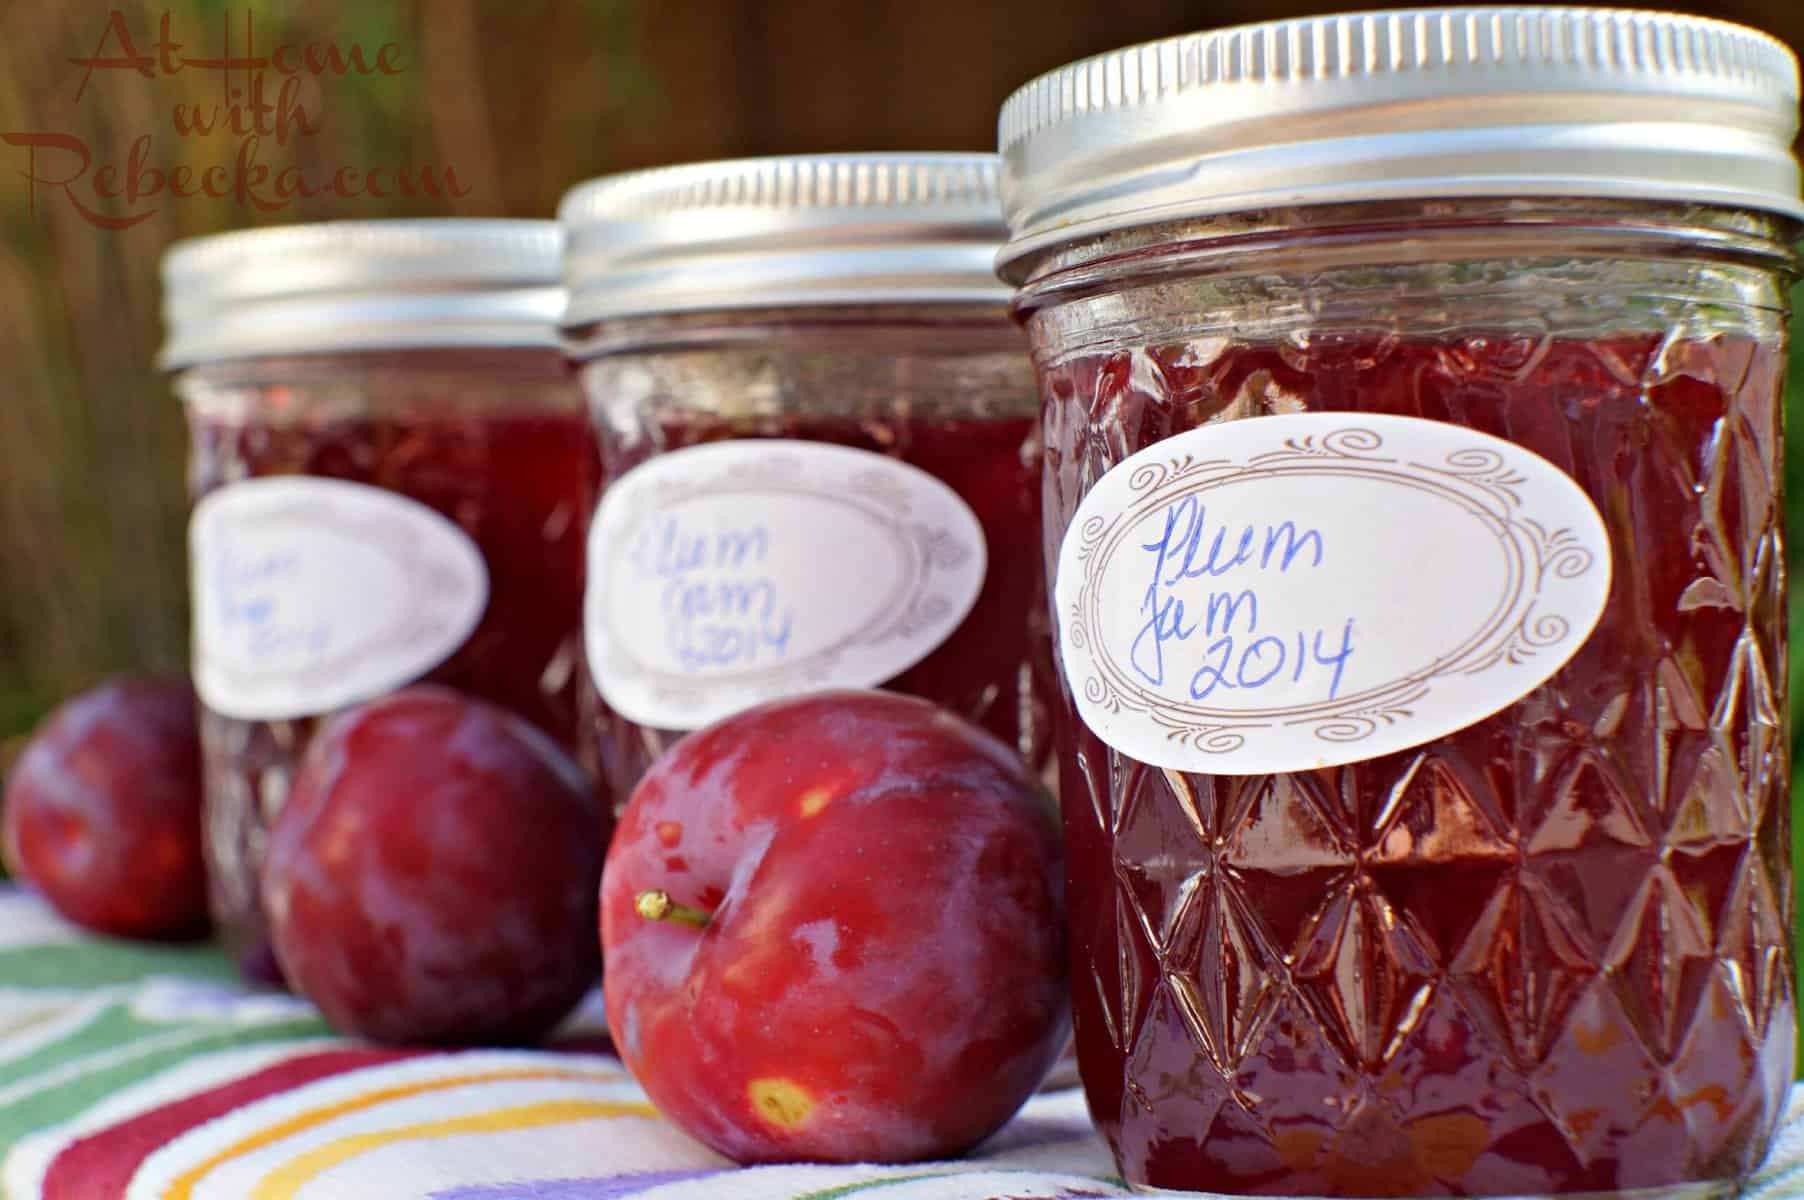  You don't need to be a jam-maker to whip up this plum jam recipe.